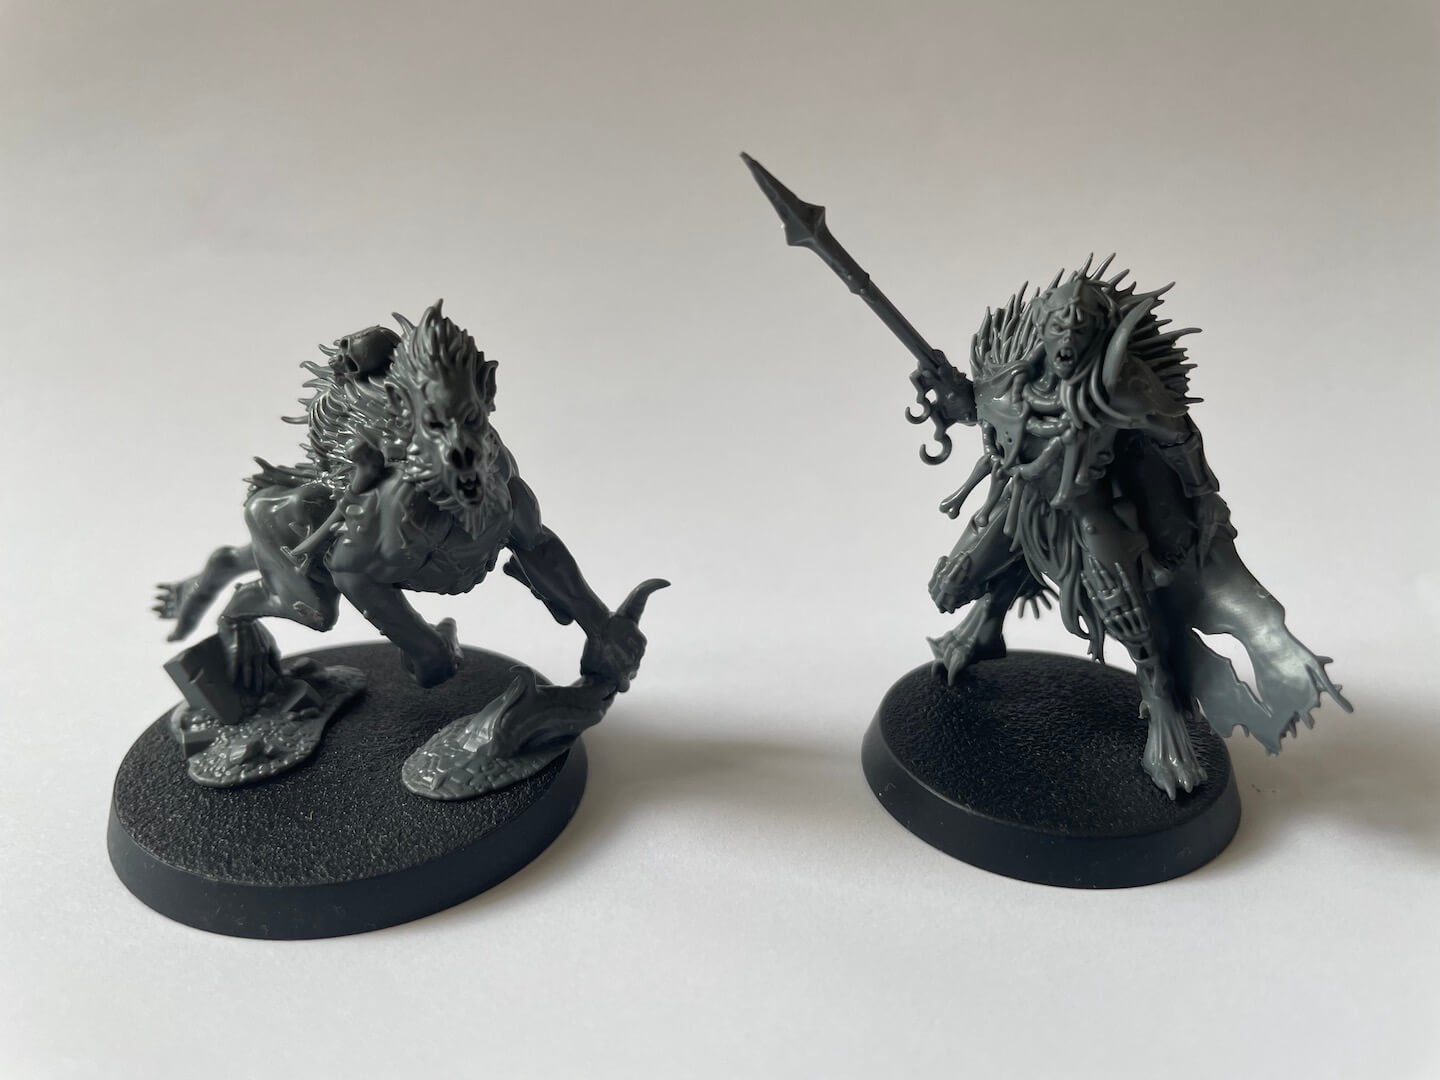 An image of Royal Beastflayer minis from Warcry Nightmare Quest